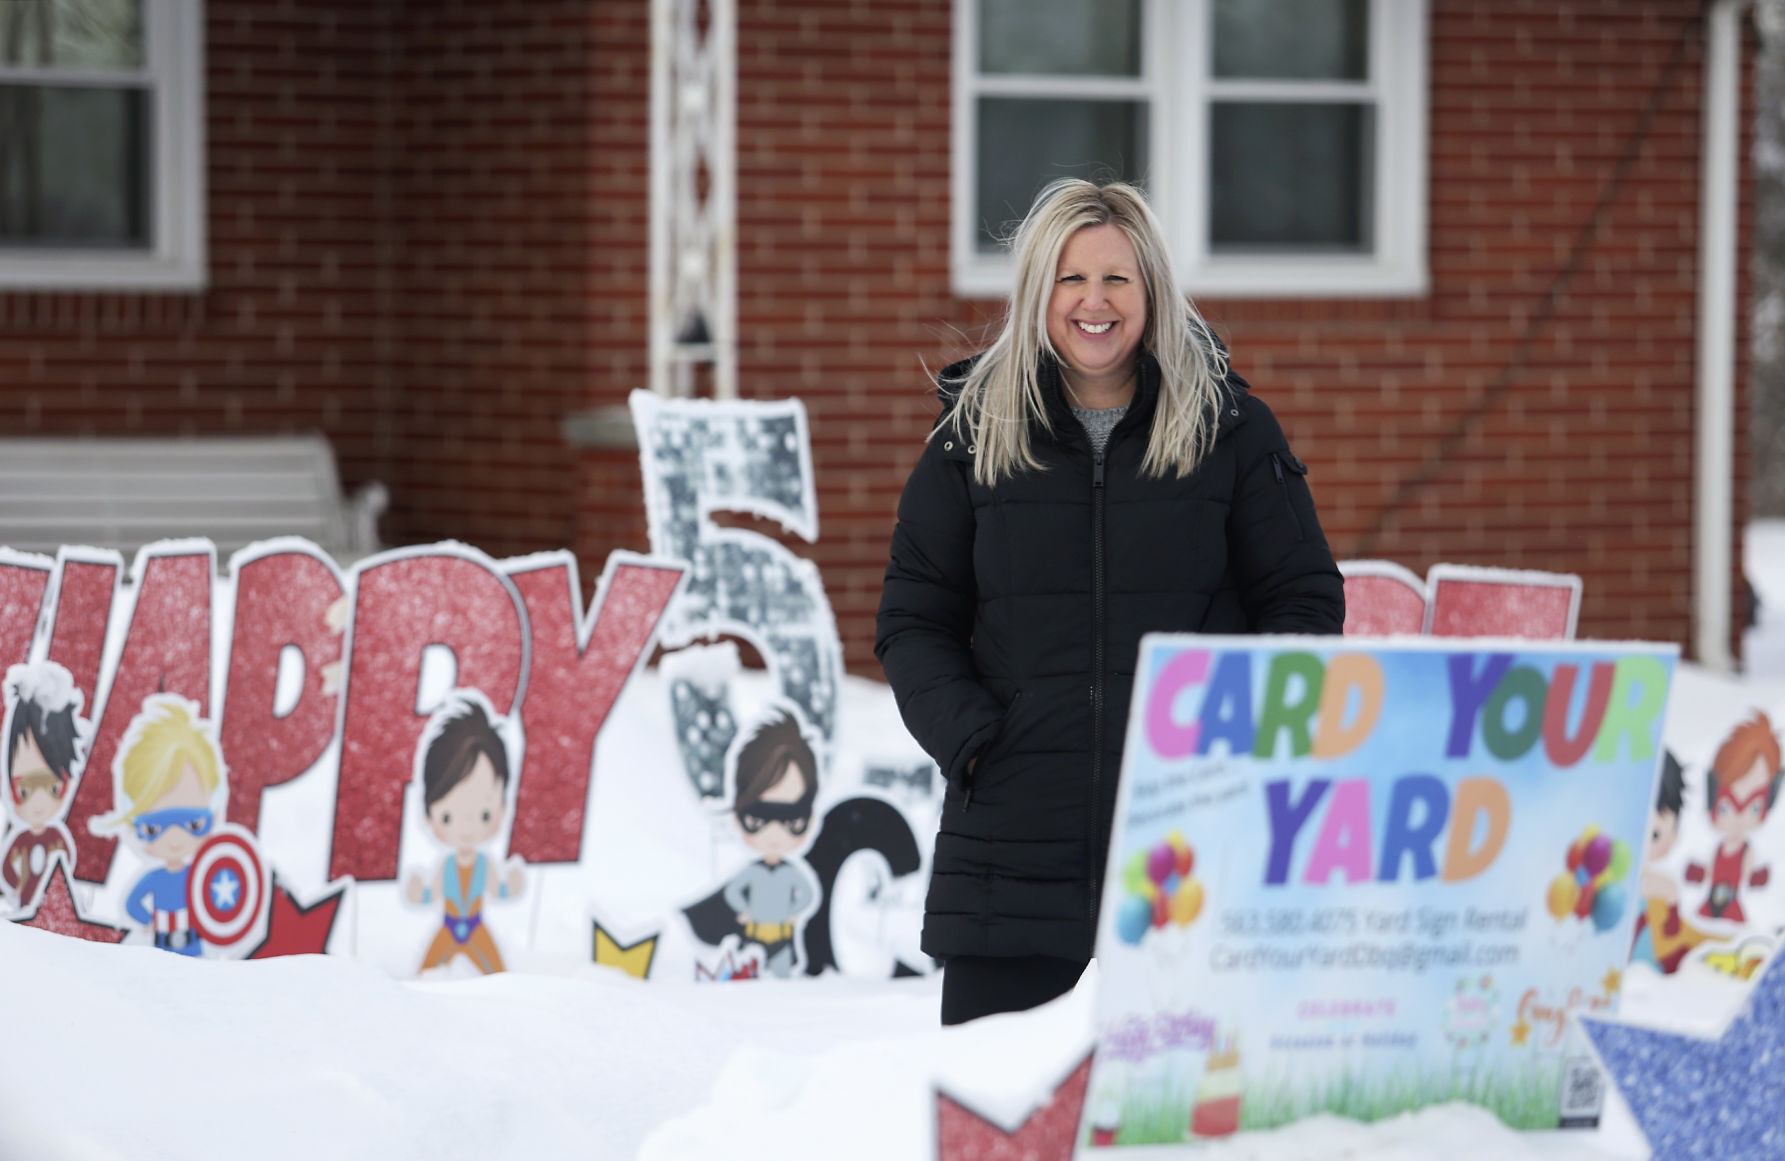 Jill Keck is the owner of Card Your Yard Dubuque. Photo taken a current display in Dubuque on Friday, Feb. 5, 2021. PHOTO CREDIT: NICKI KOHL